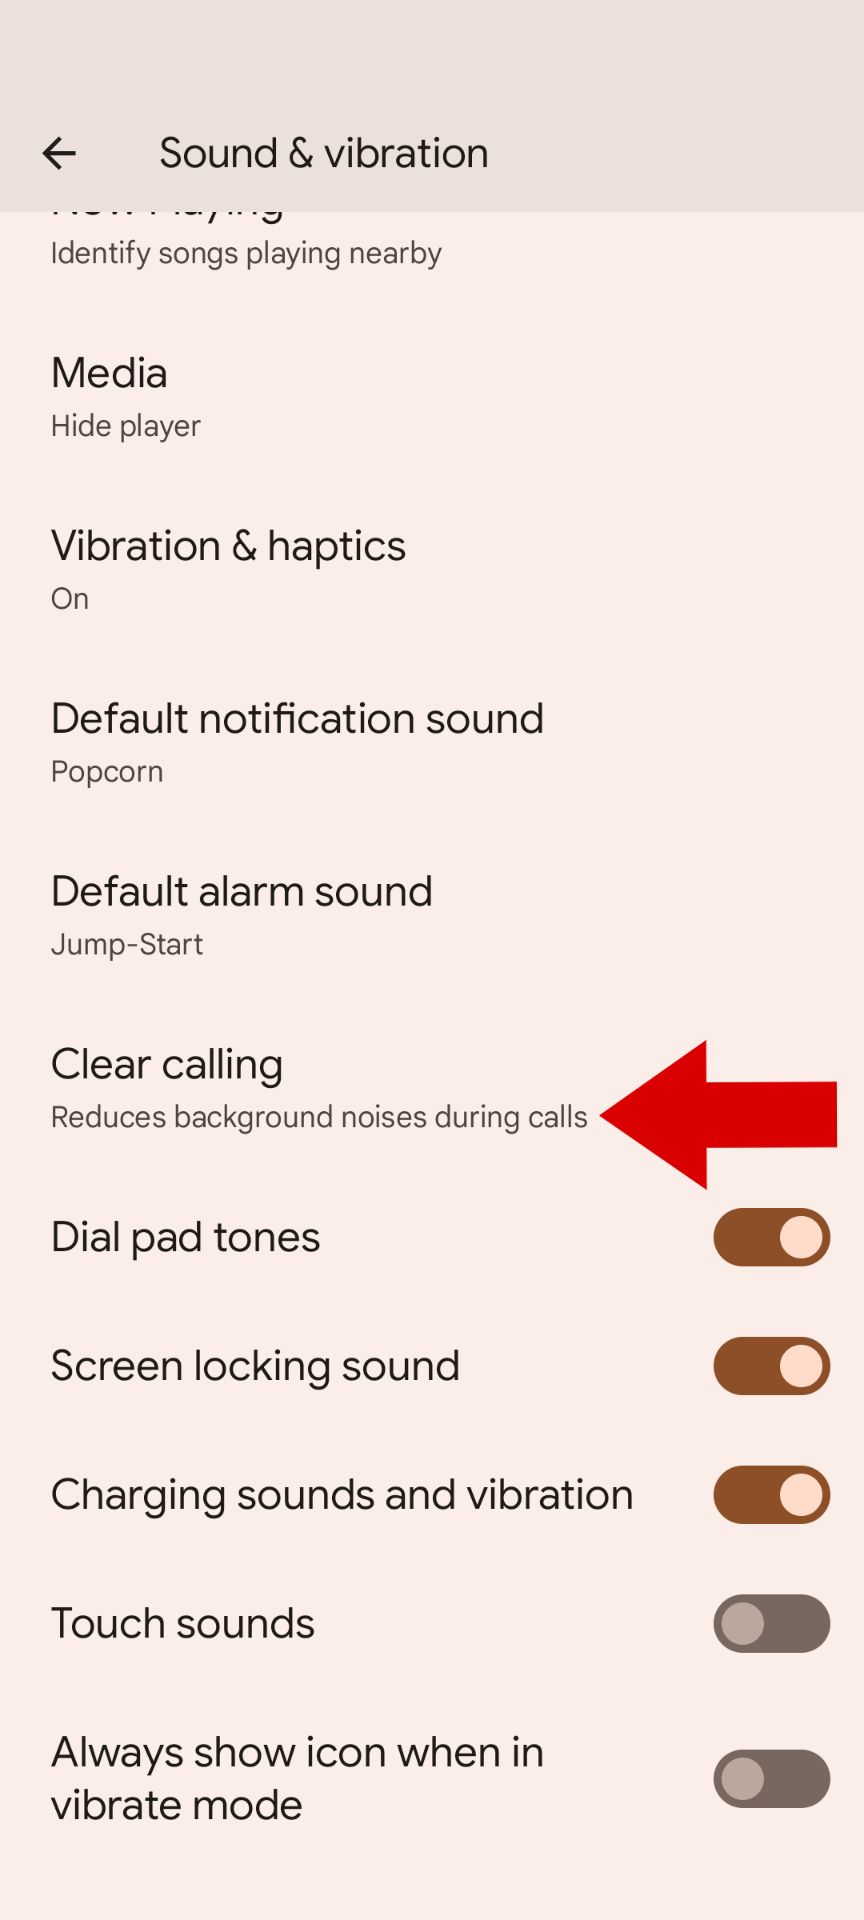 The Sound & vibration section in the Pixel Settings menu with a red arrow pointing to the Clear calling section